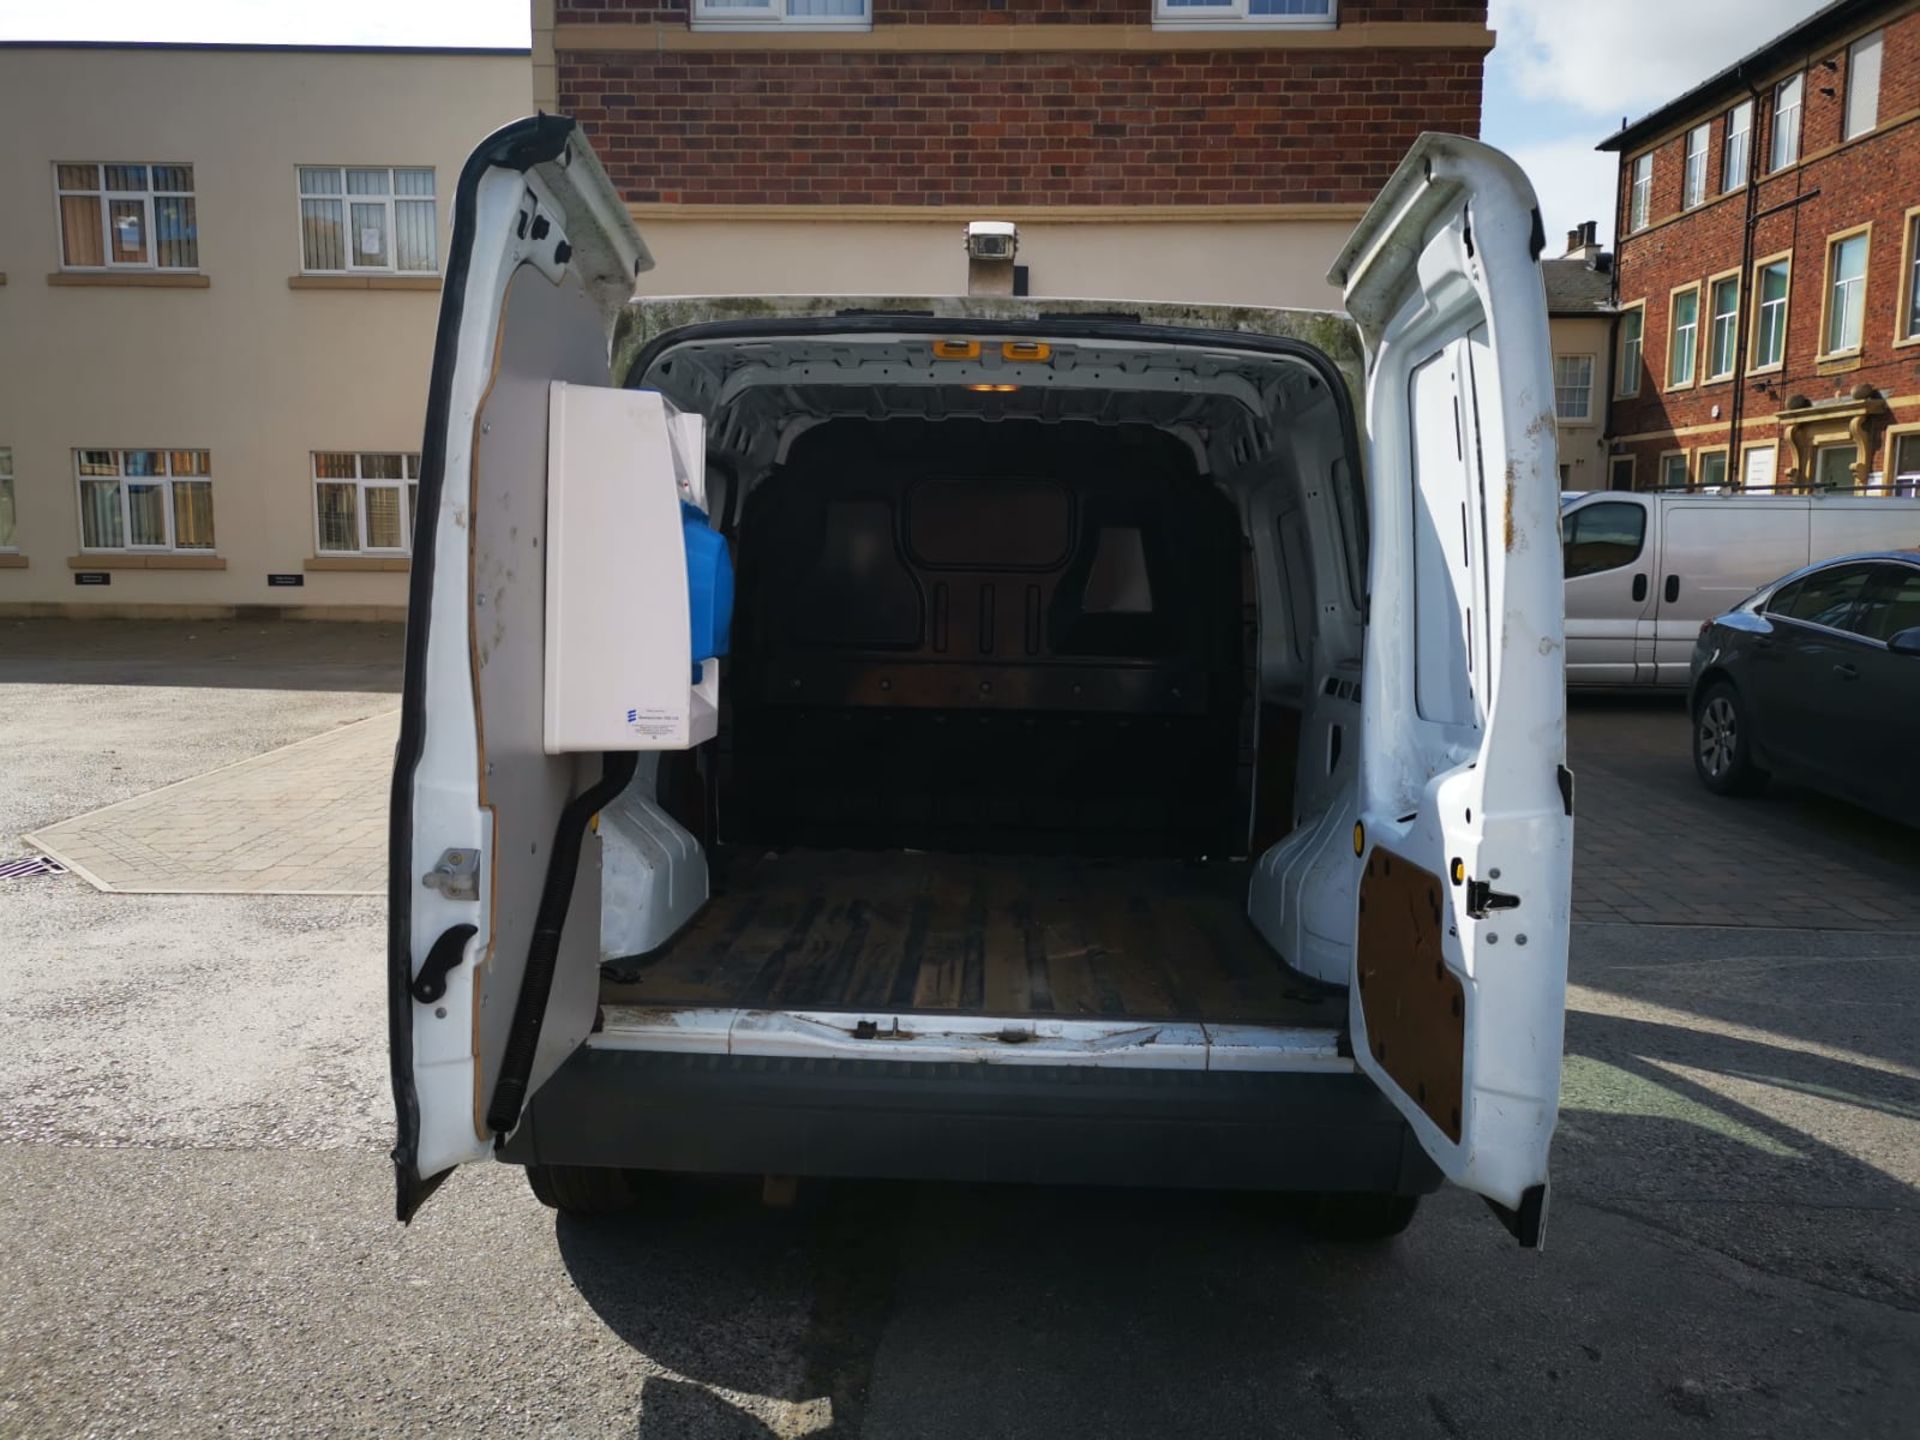 ENTRY DIRECT FROM LOCAL AUTHORITY Ford Transit Connect 75 T200 - Image 19 of 27